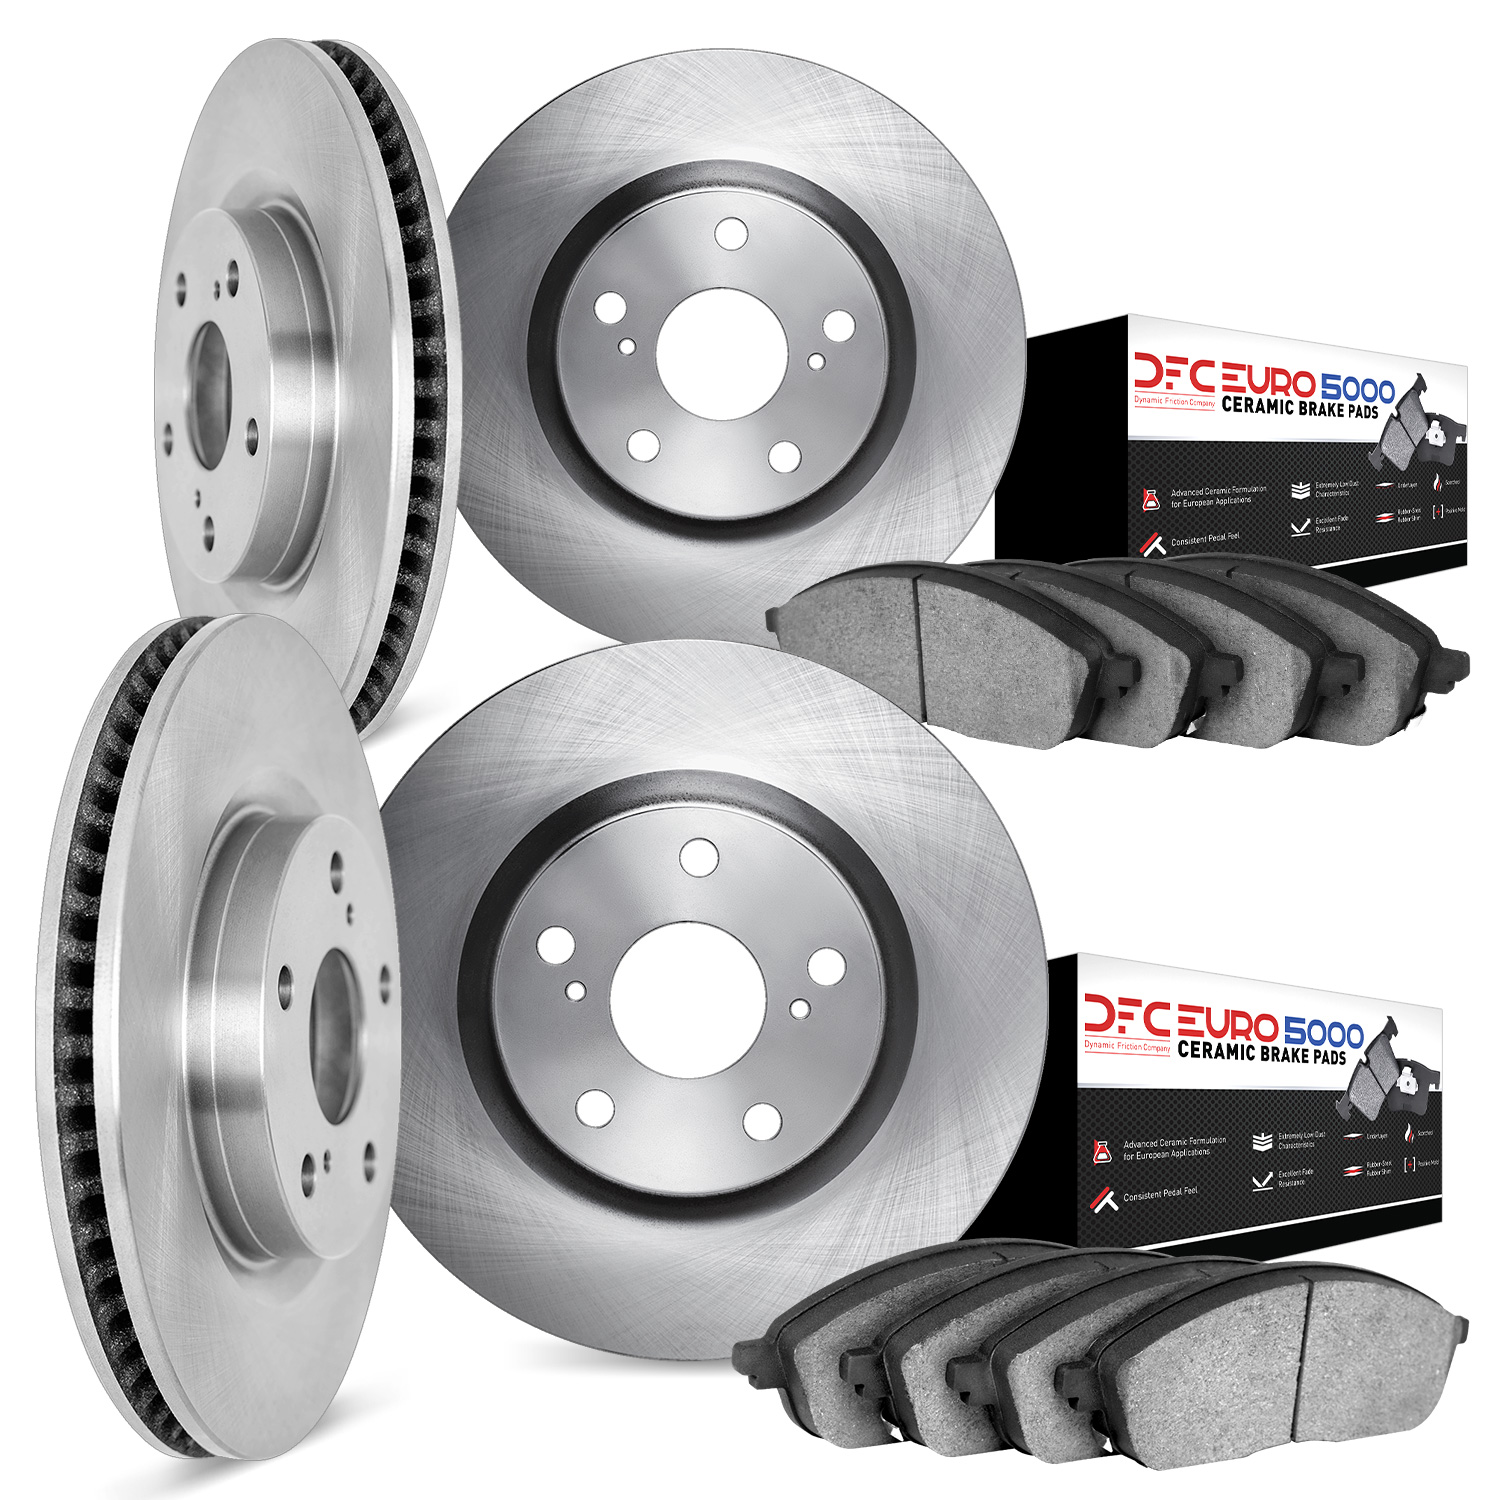 6604-63026 Brake Rotors w/5000 Euro Ceramic Brake Pads, 2009-2015 Mercedes-Benz, Position: Front and Rear